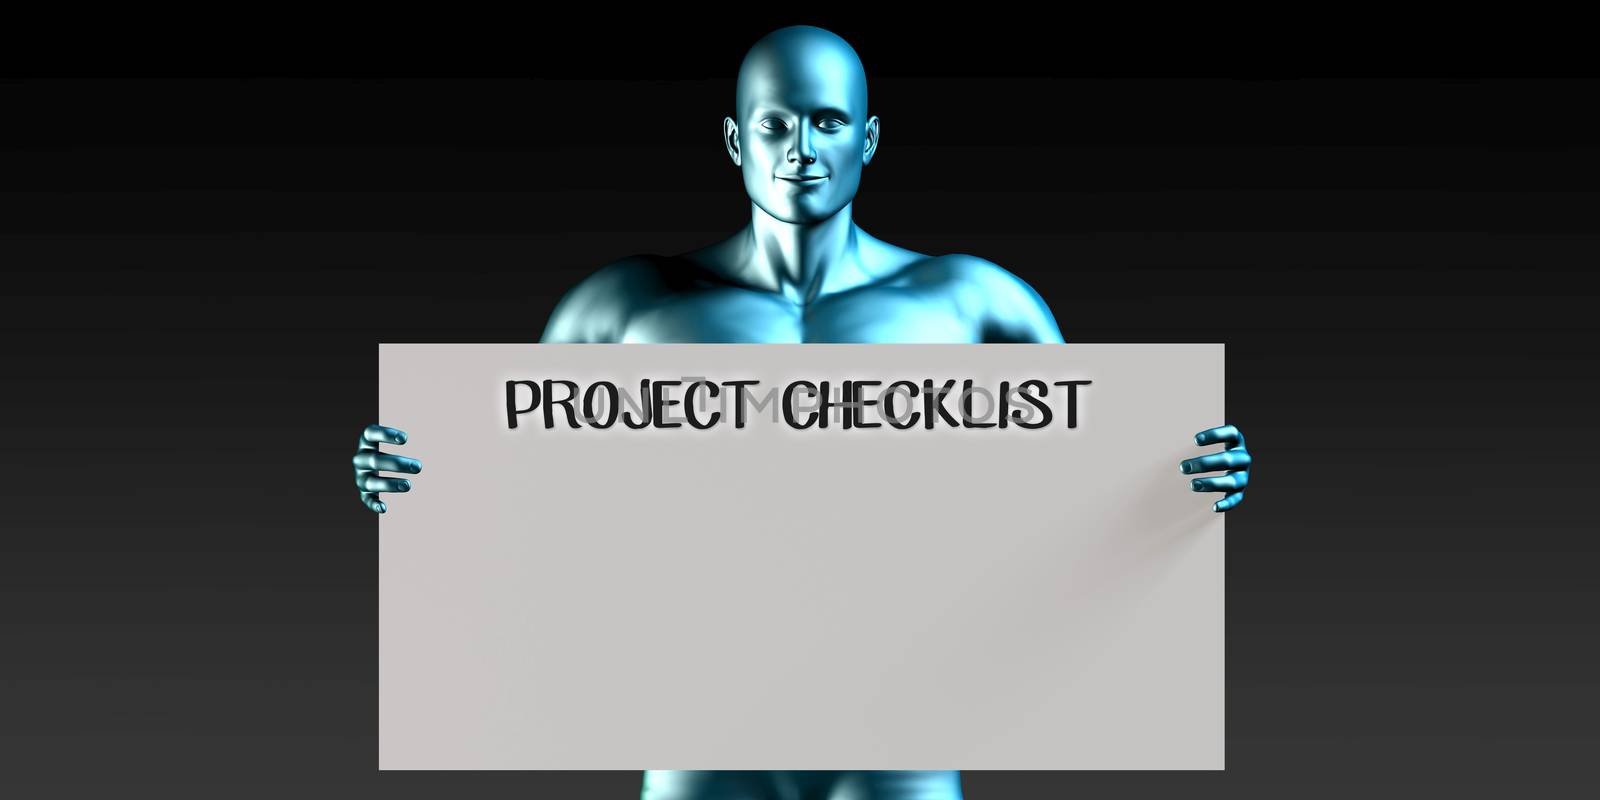 Project Checklist by kentoh